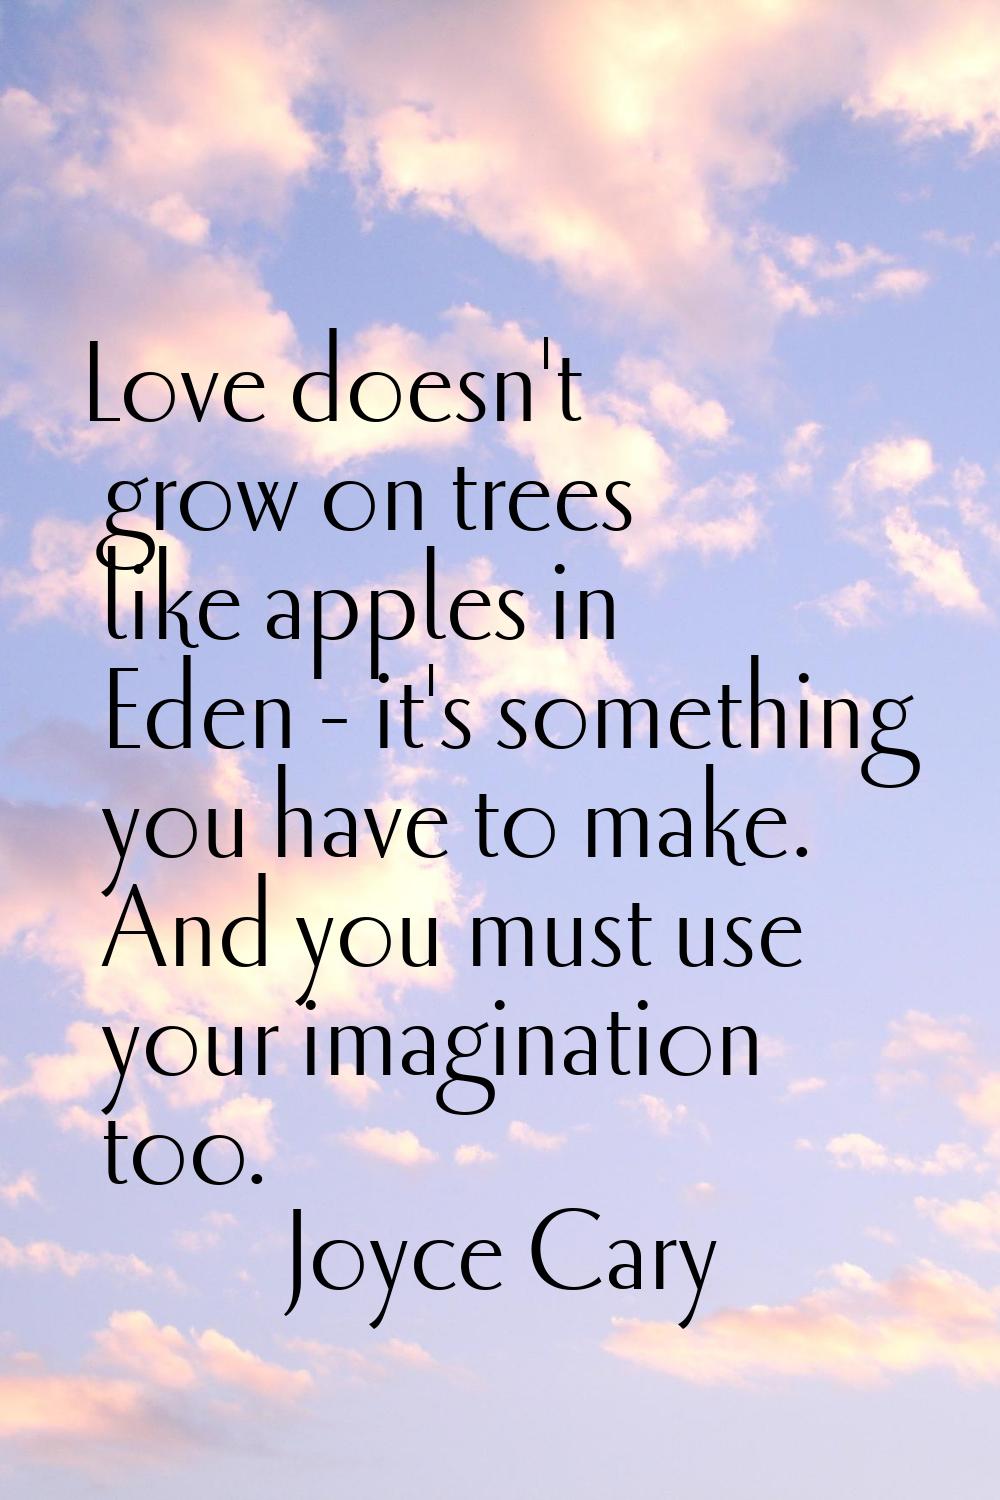 Love doesn't grow on trees like apples in Eden - it's something you have to make. And you must use 